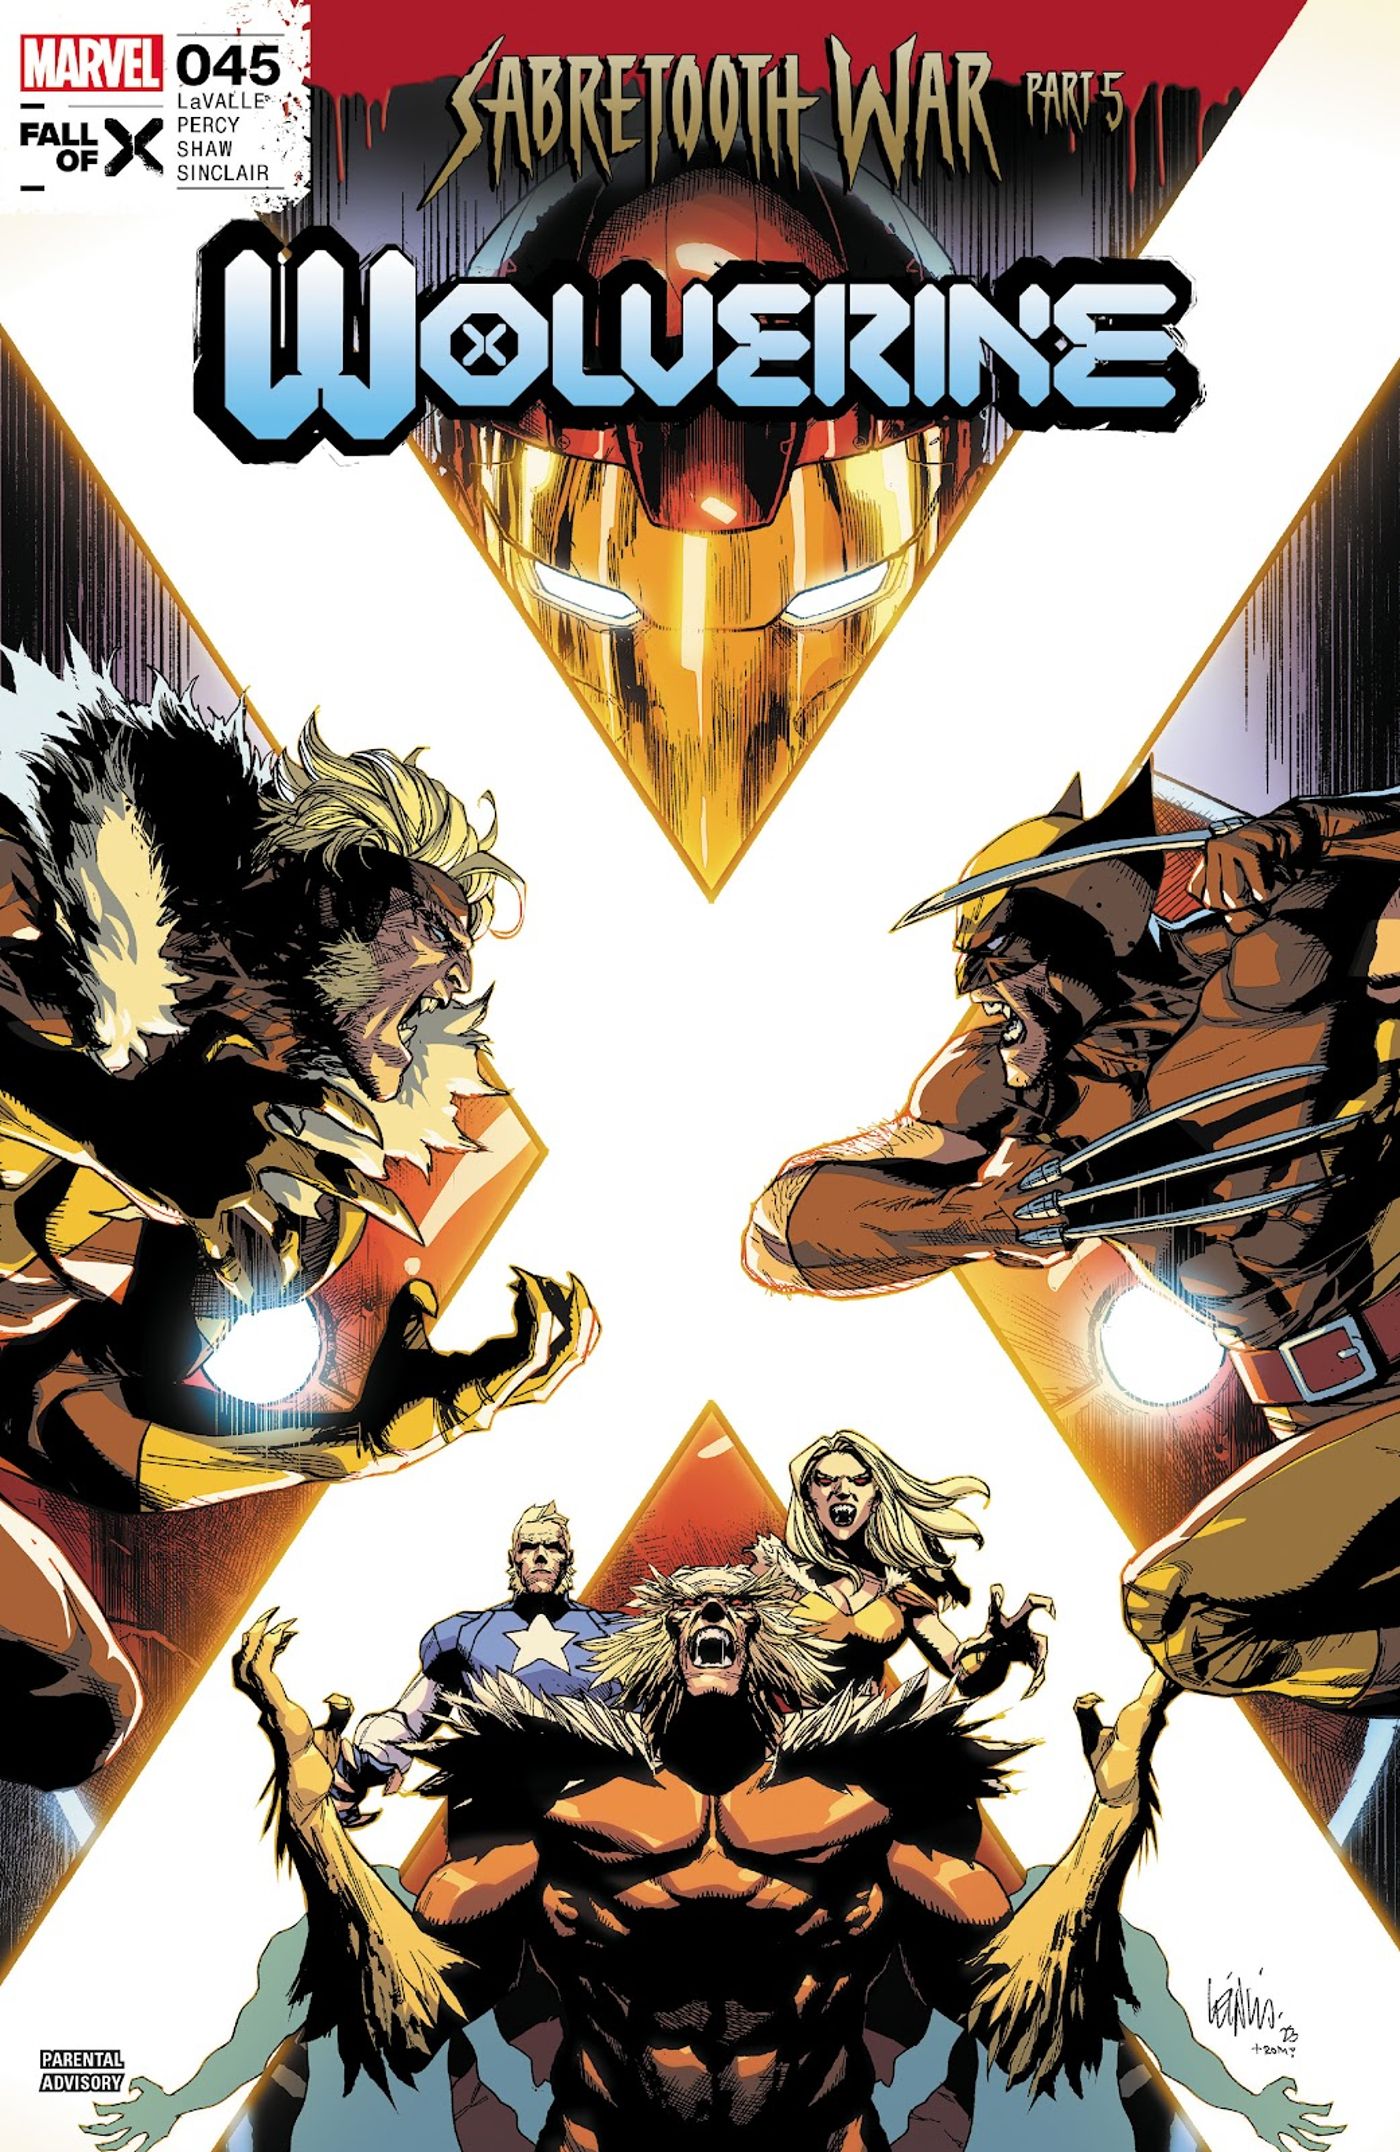 Wolverine #45 cover, Sabretooth & Wolverine lunge at one another; Sabretooth variants in background.